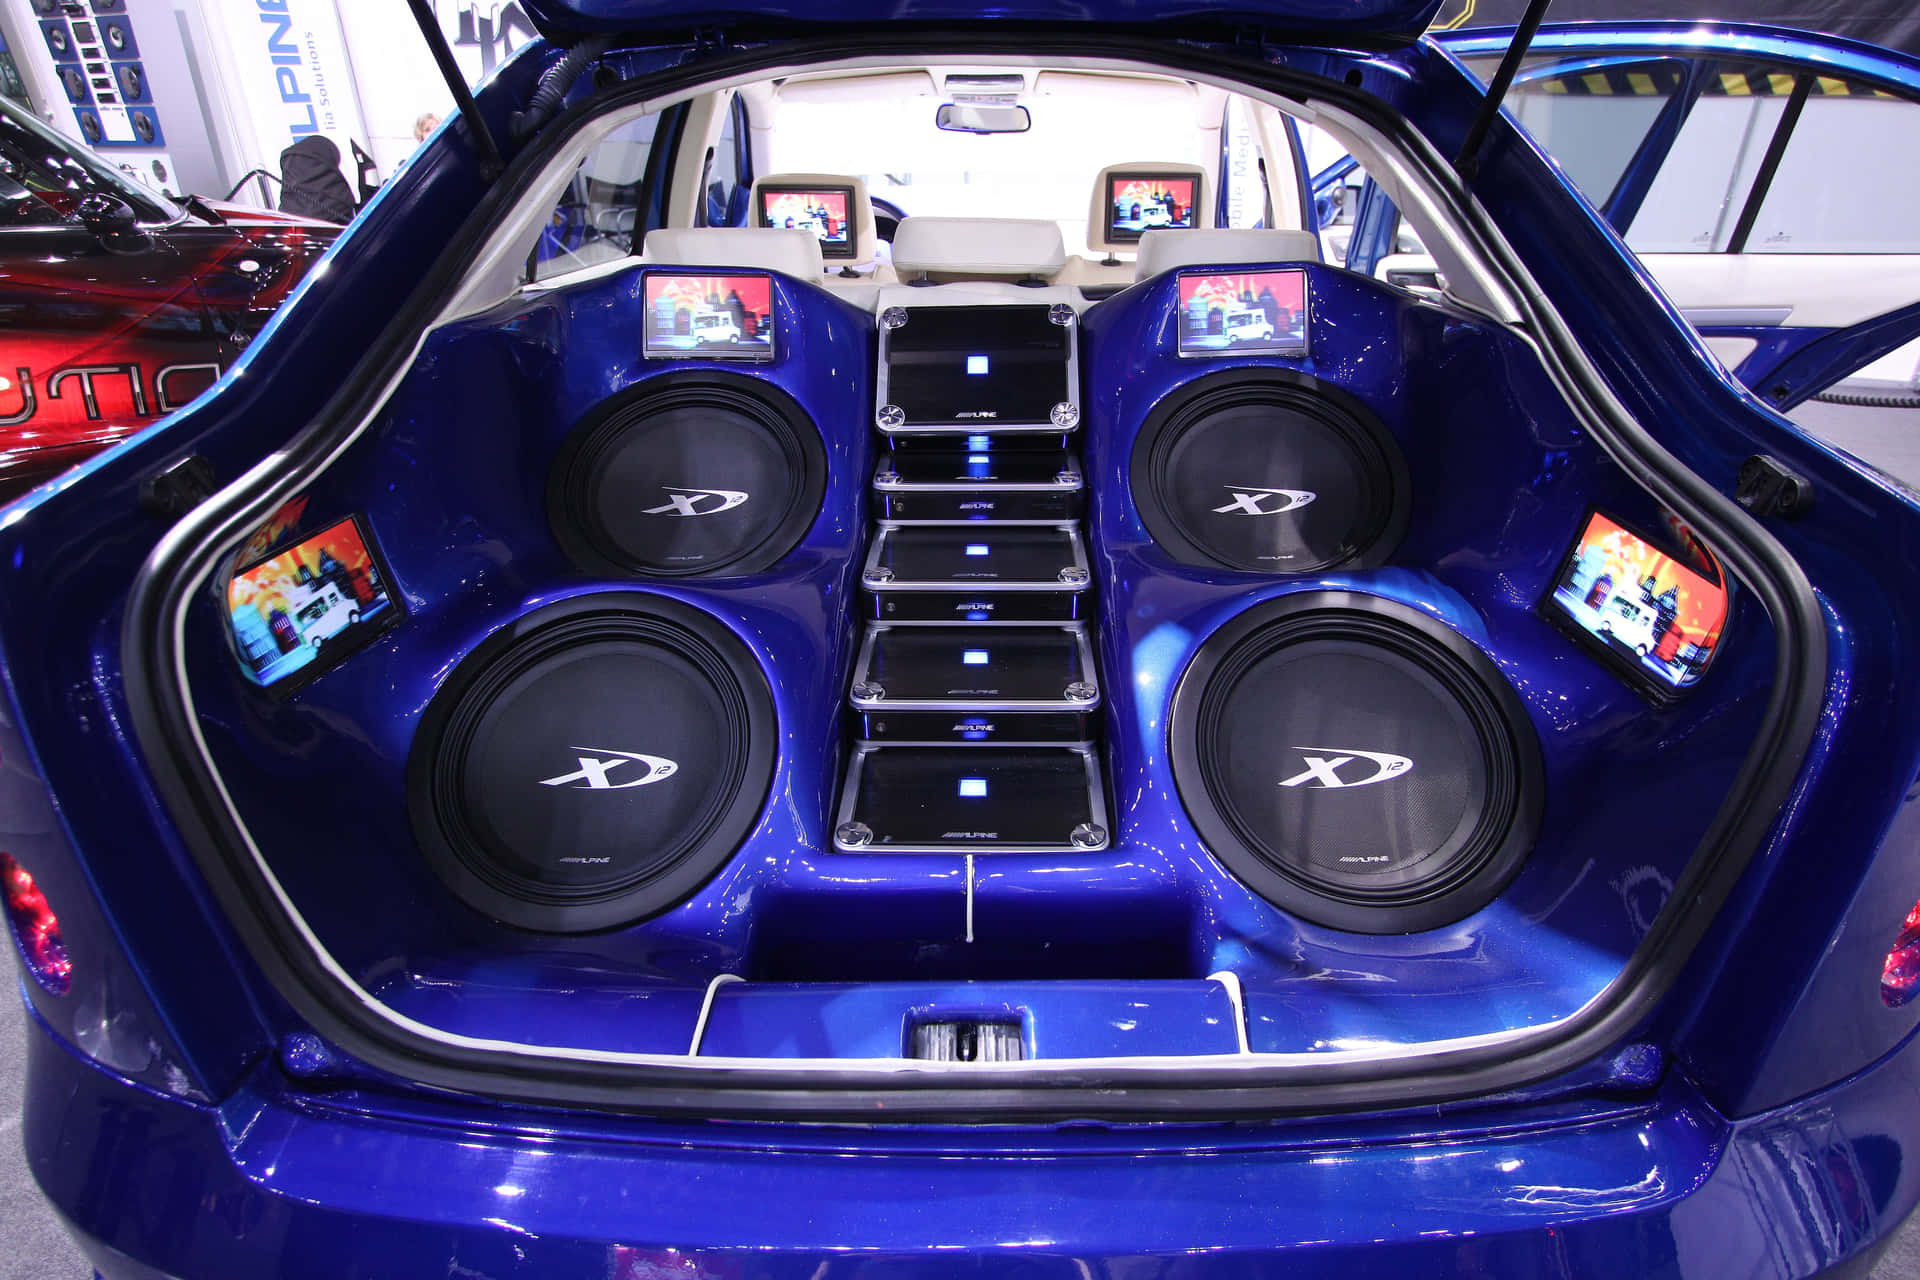 A modern car audio system with a touch screen display Wallpaper